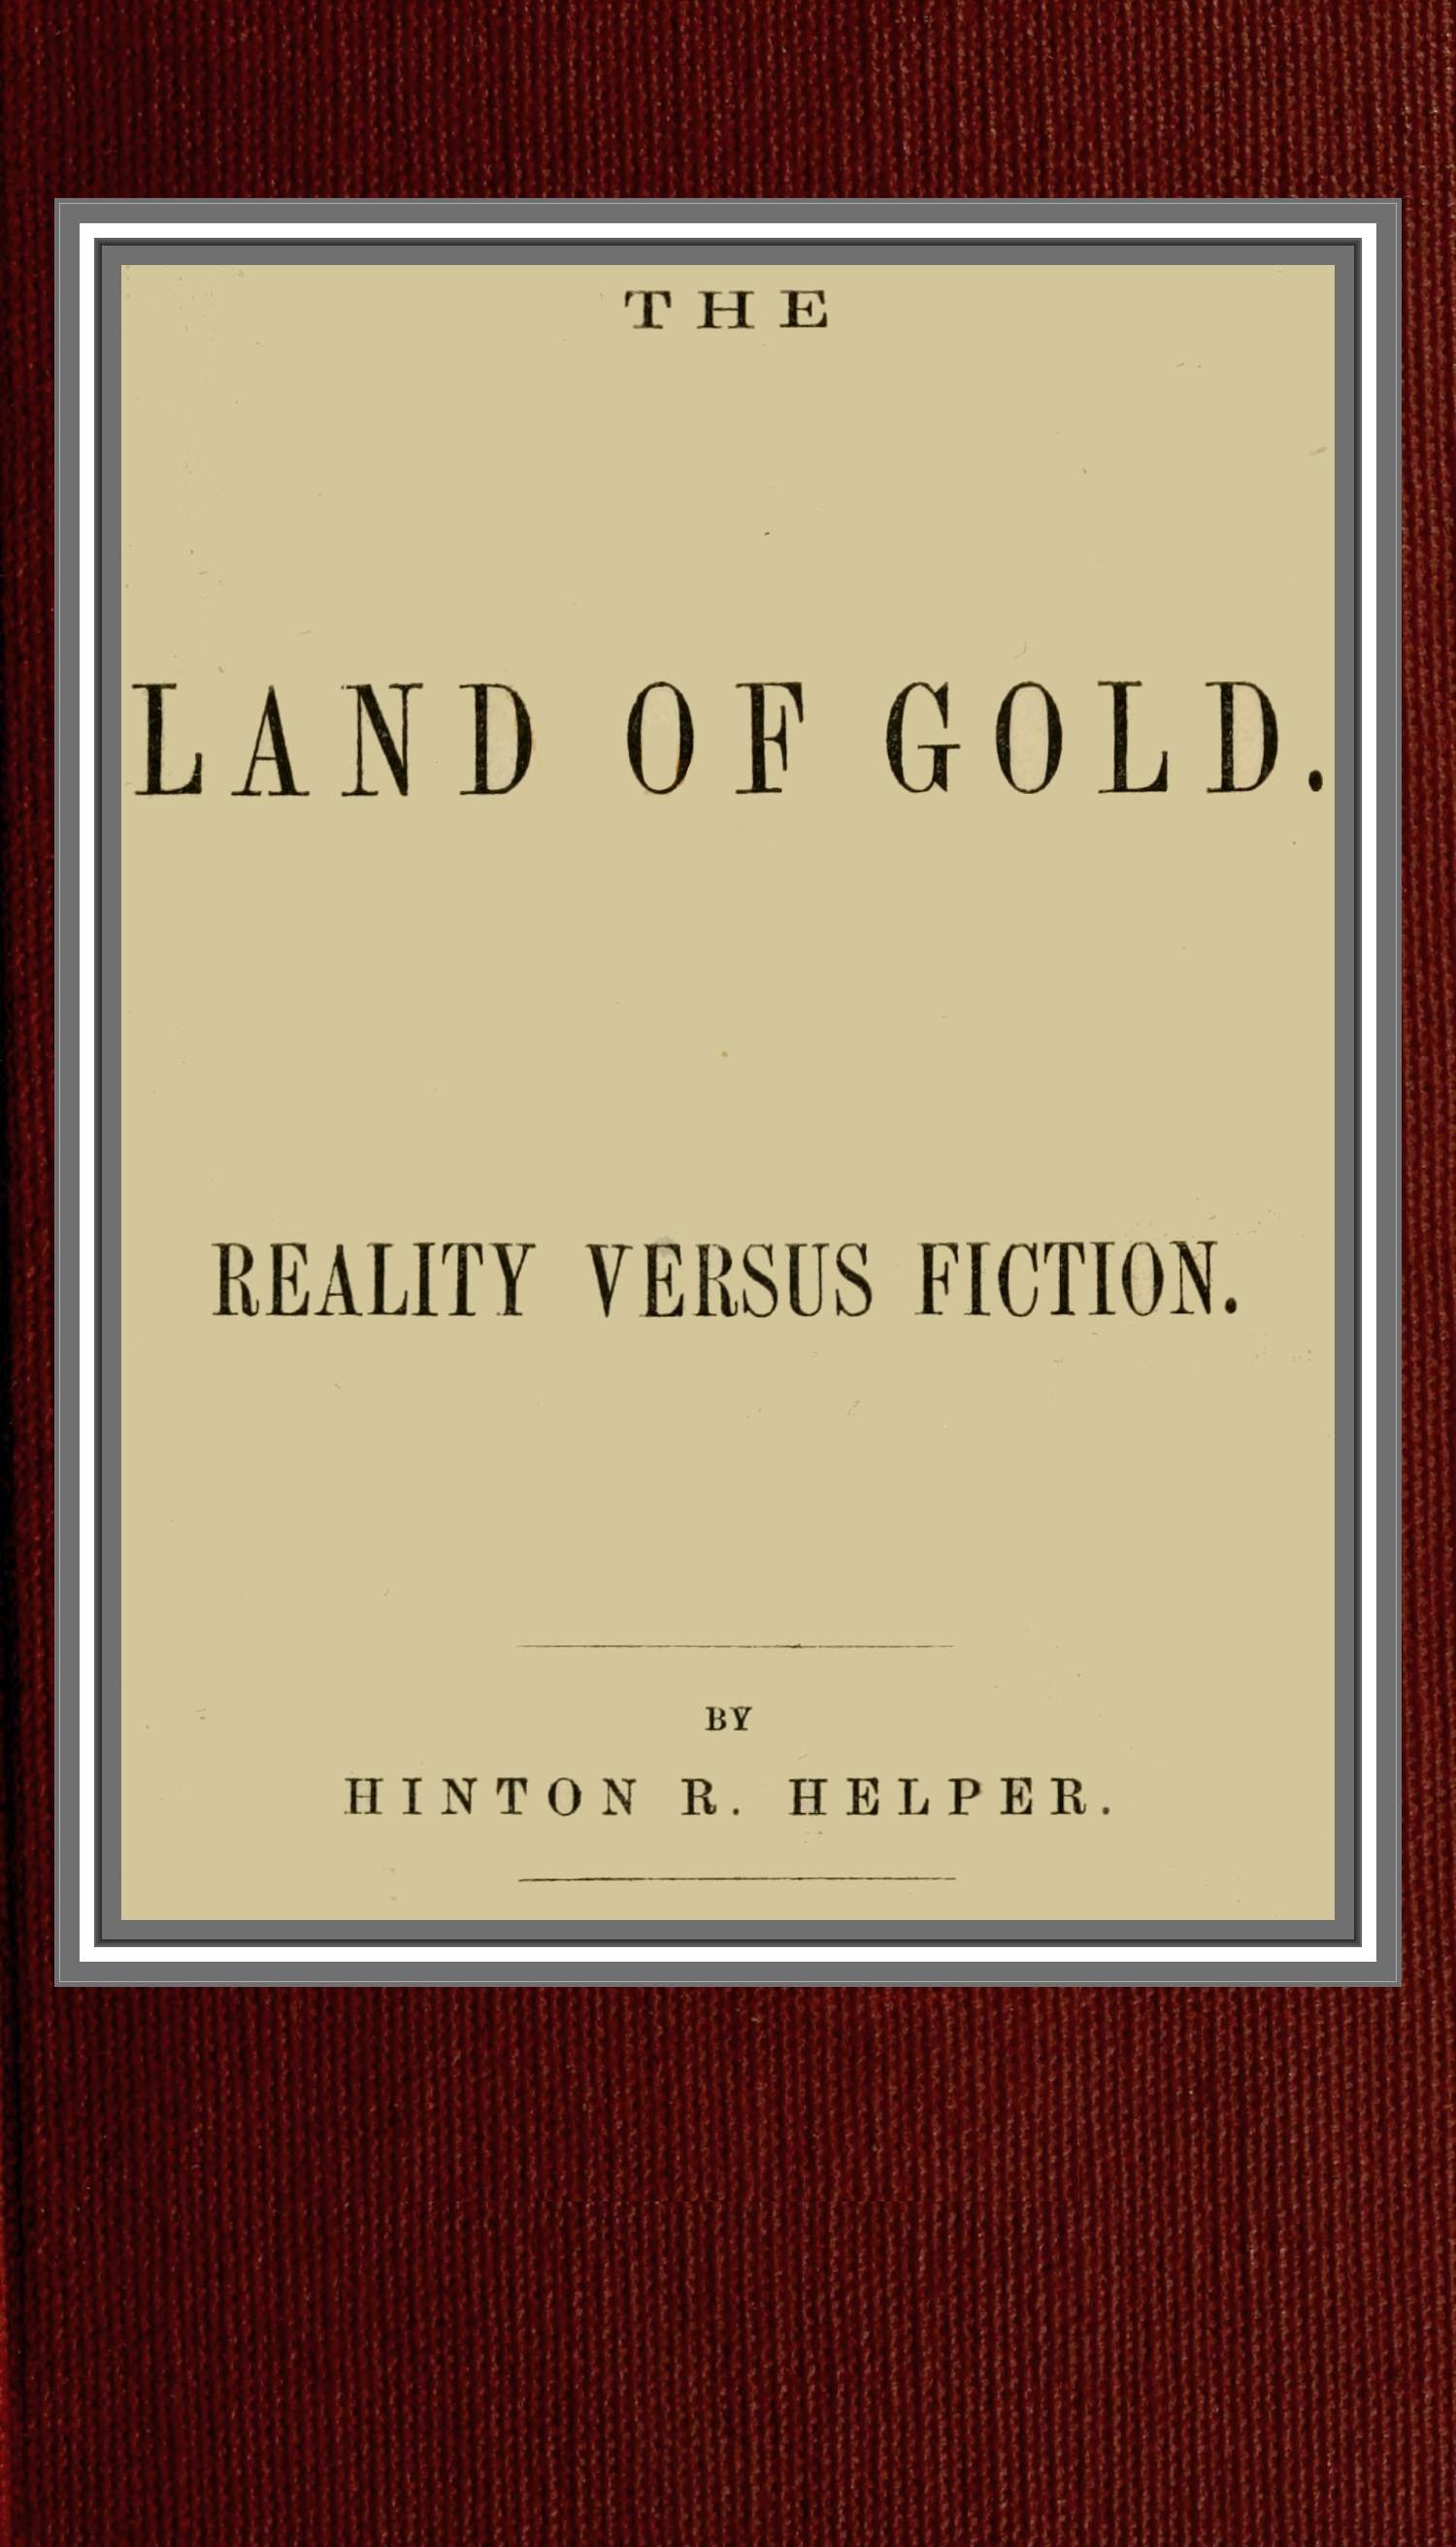 The Project Gutenberg eBook of The land of gold, by Hinton R pic